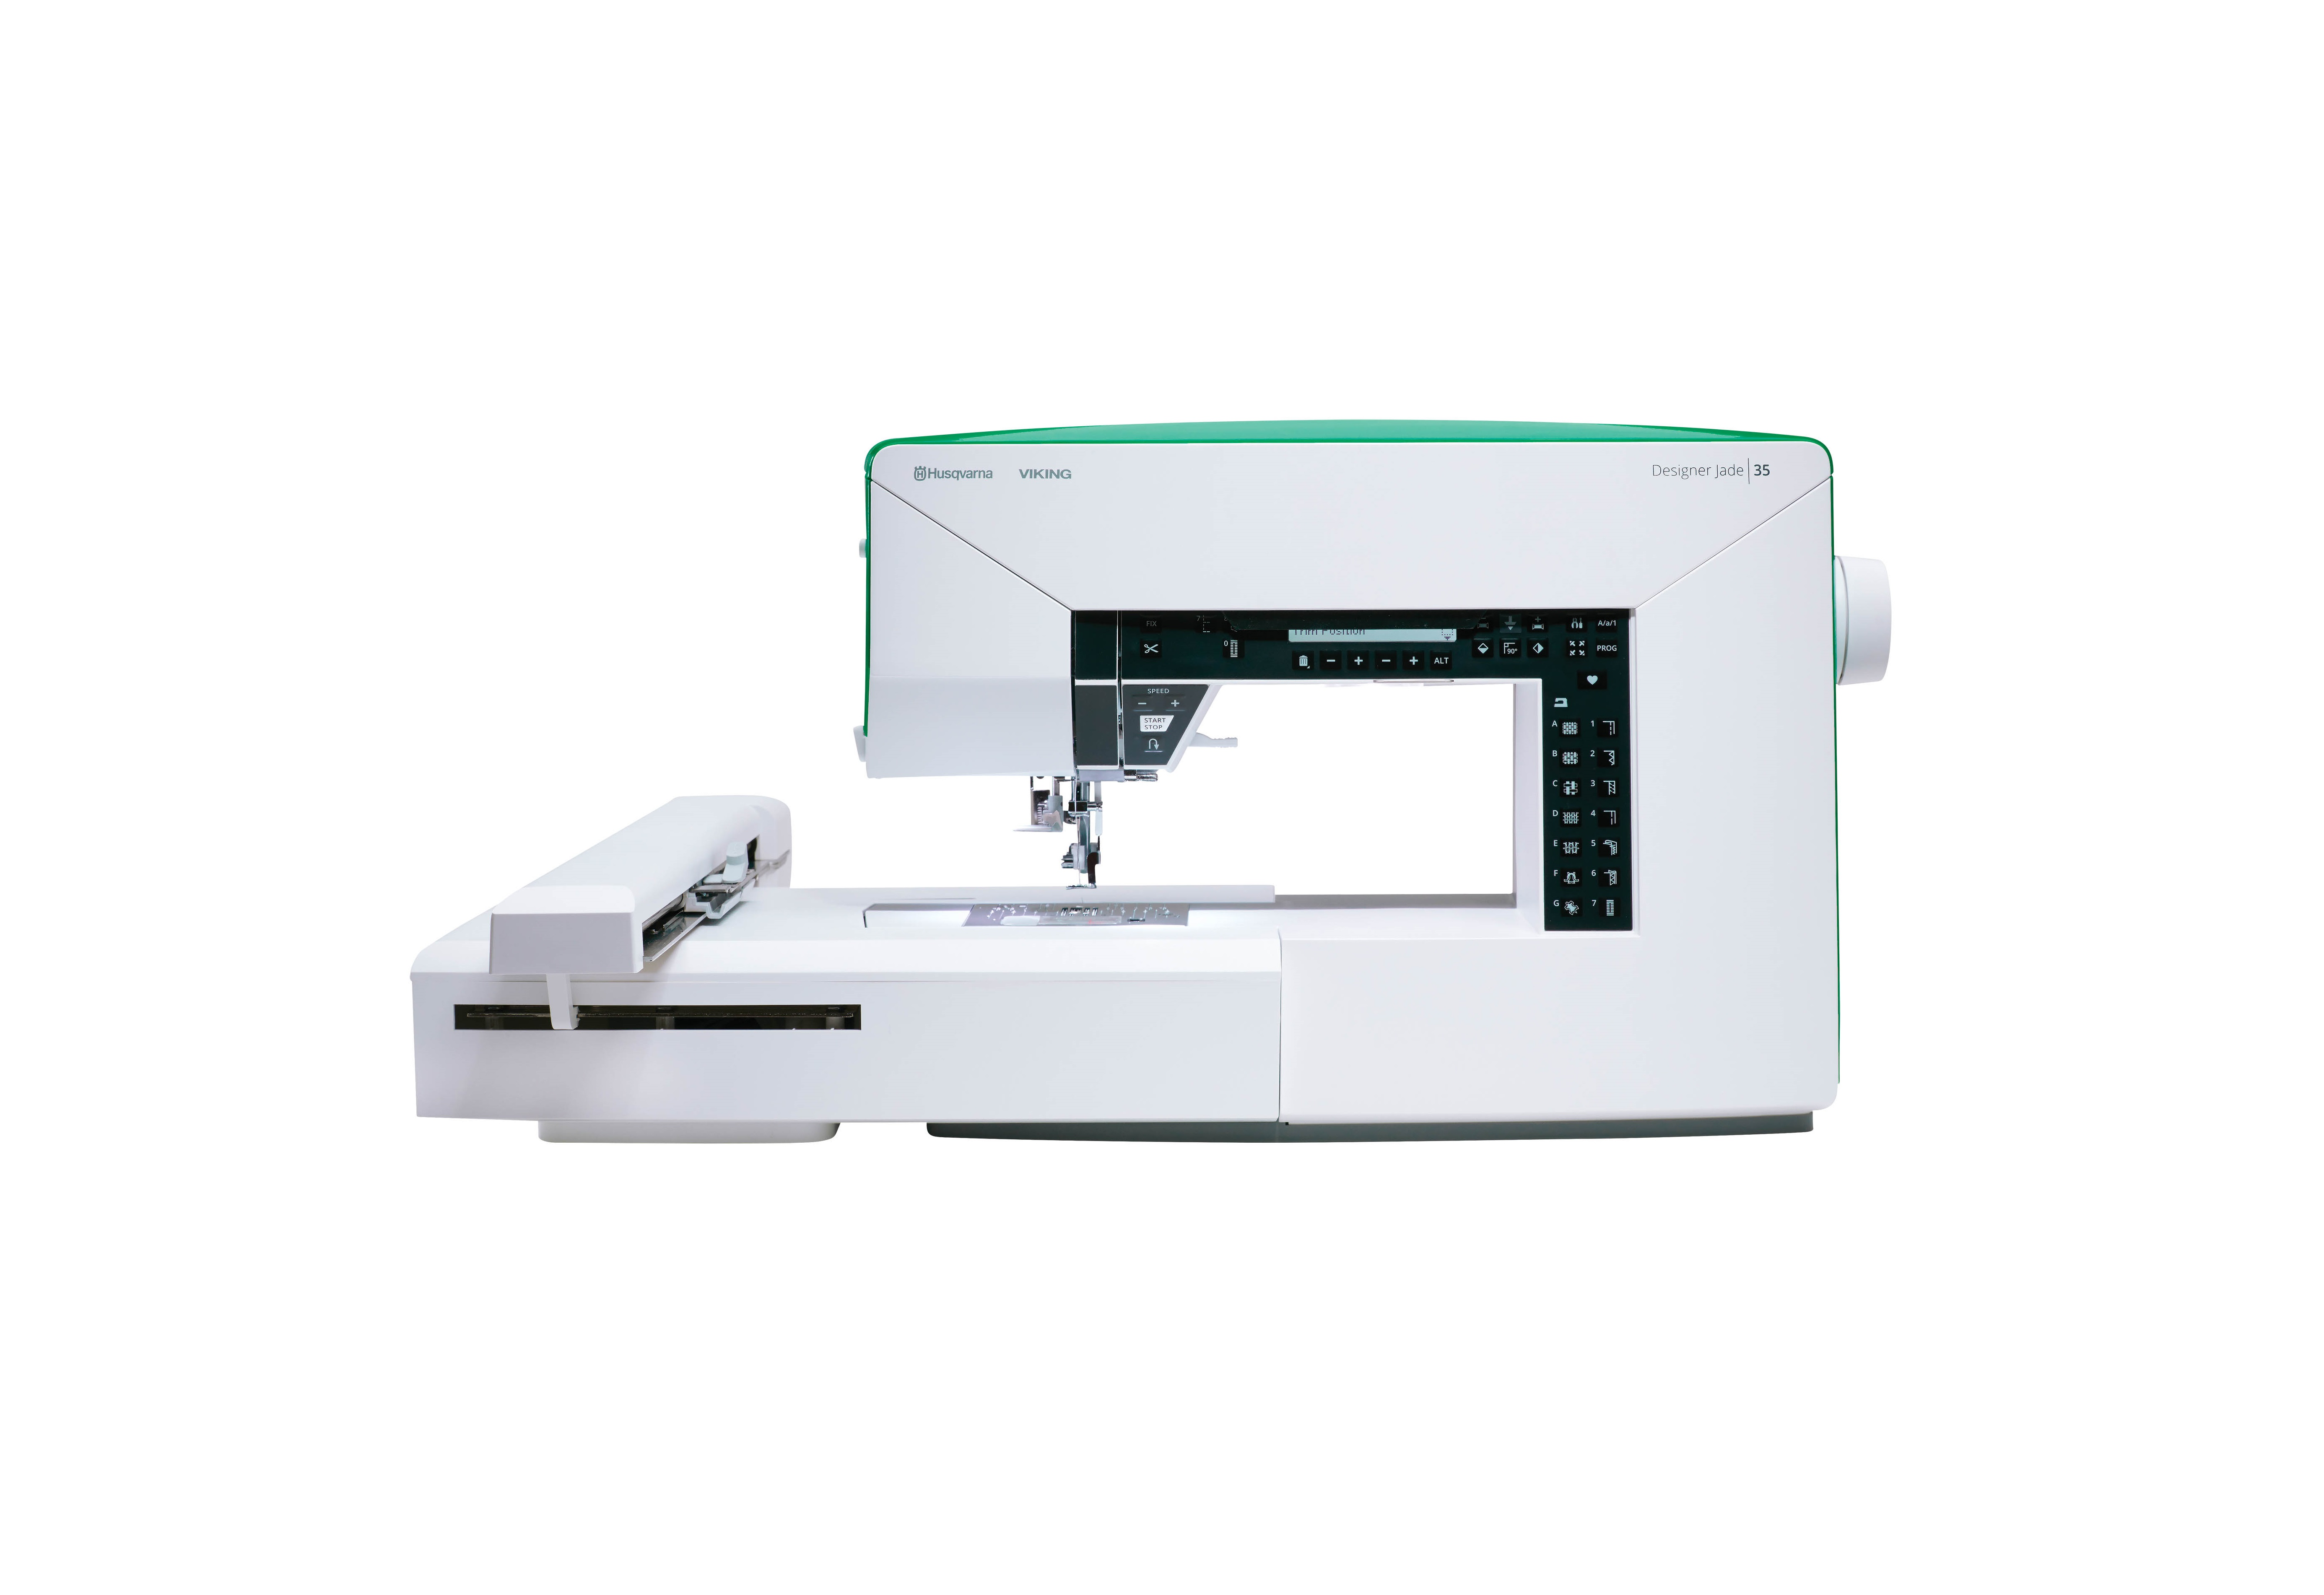 Husqvarna Viking Designer Jade 35 Sewing and Embroidery Machine for Sale at World Weidner